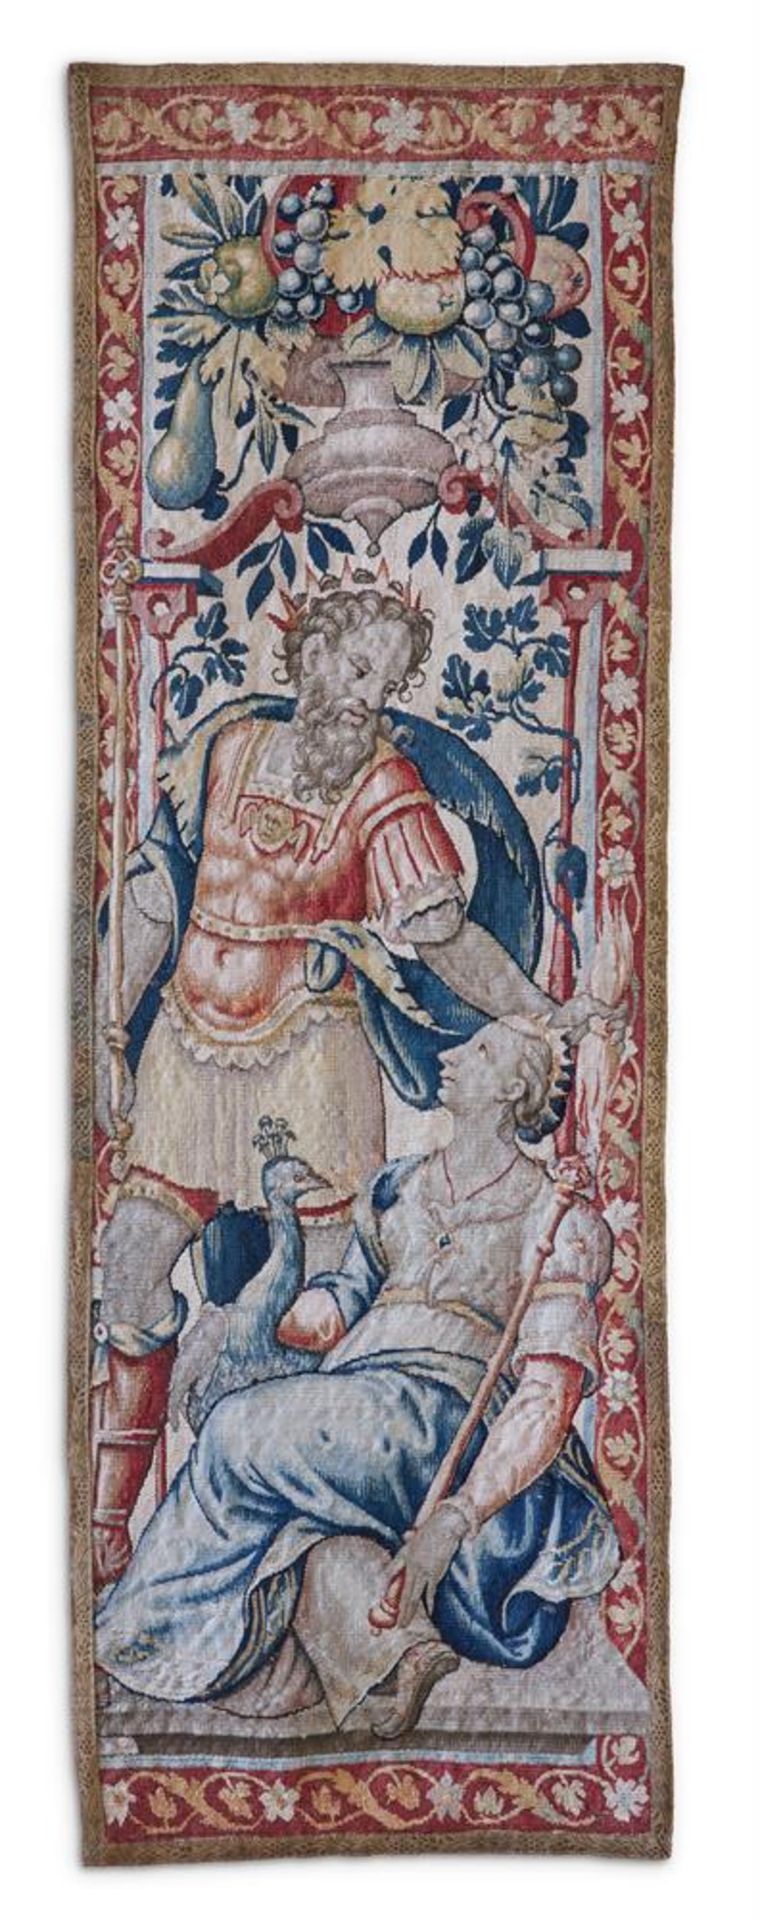 A PAIR OF BRUSSELS TAPESTRY BORDER FRAGMENTS, THIRD QUARTER 16TH CENTURY - Image 2 of 2